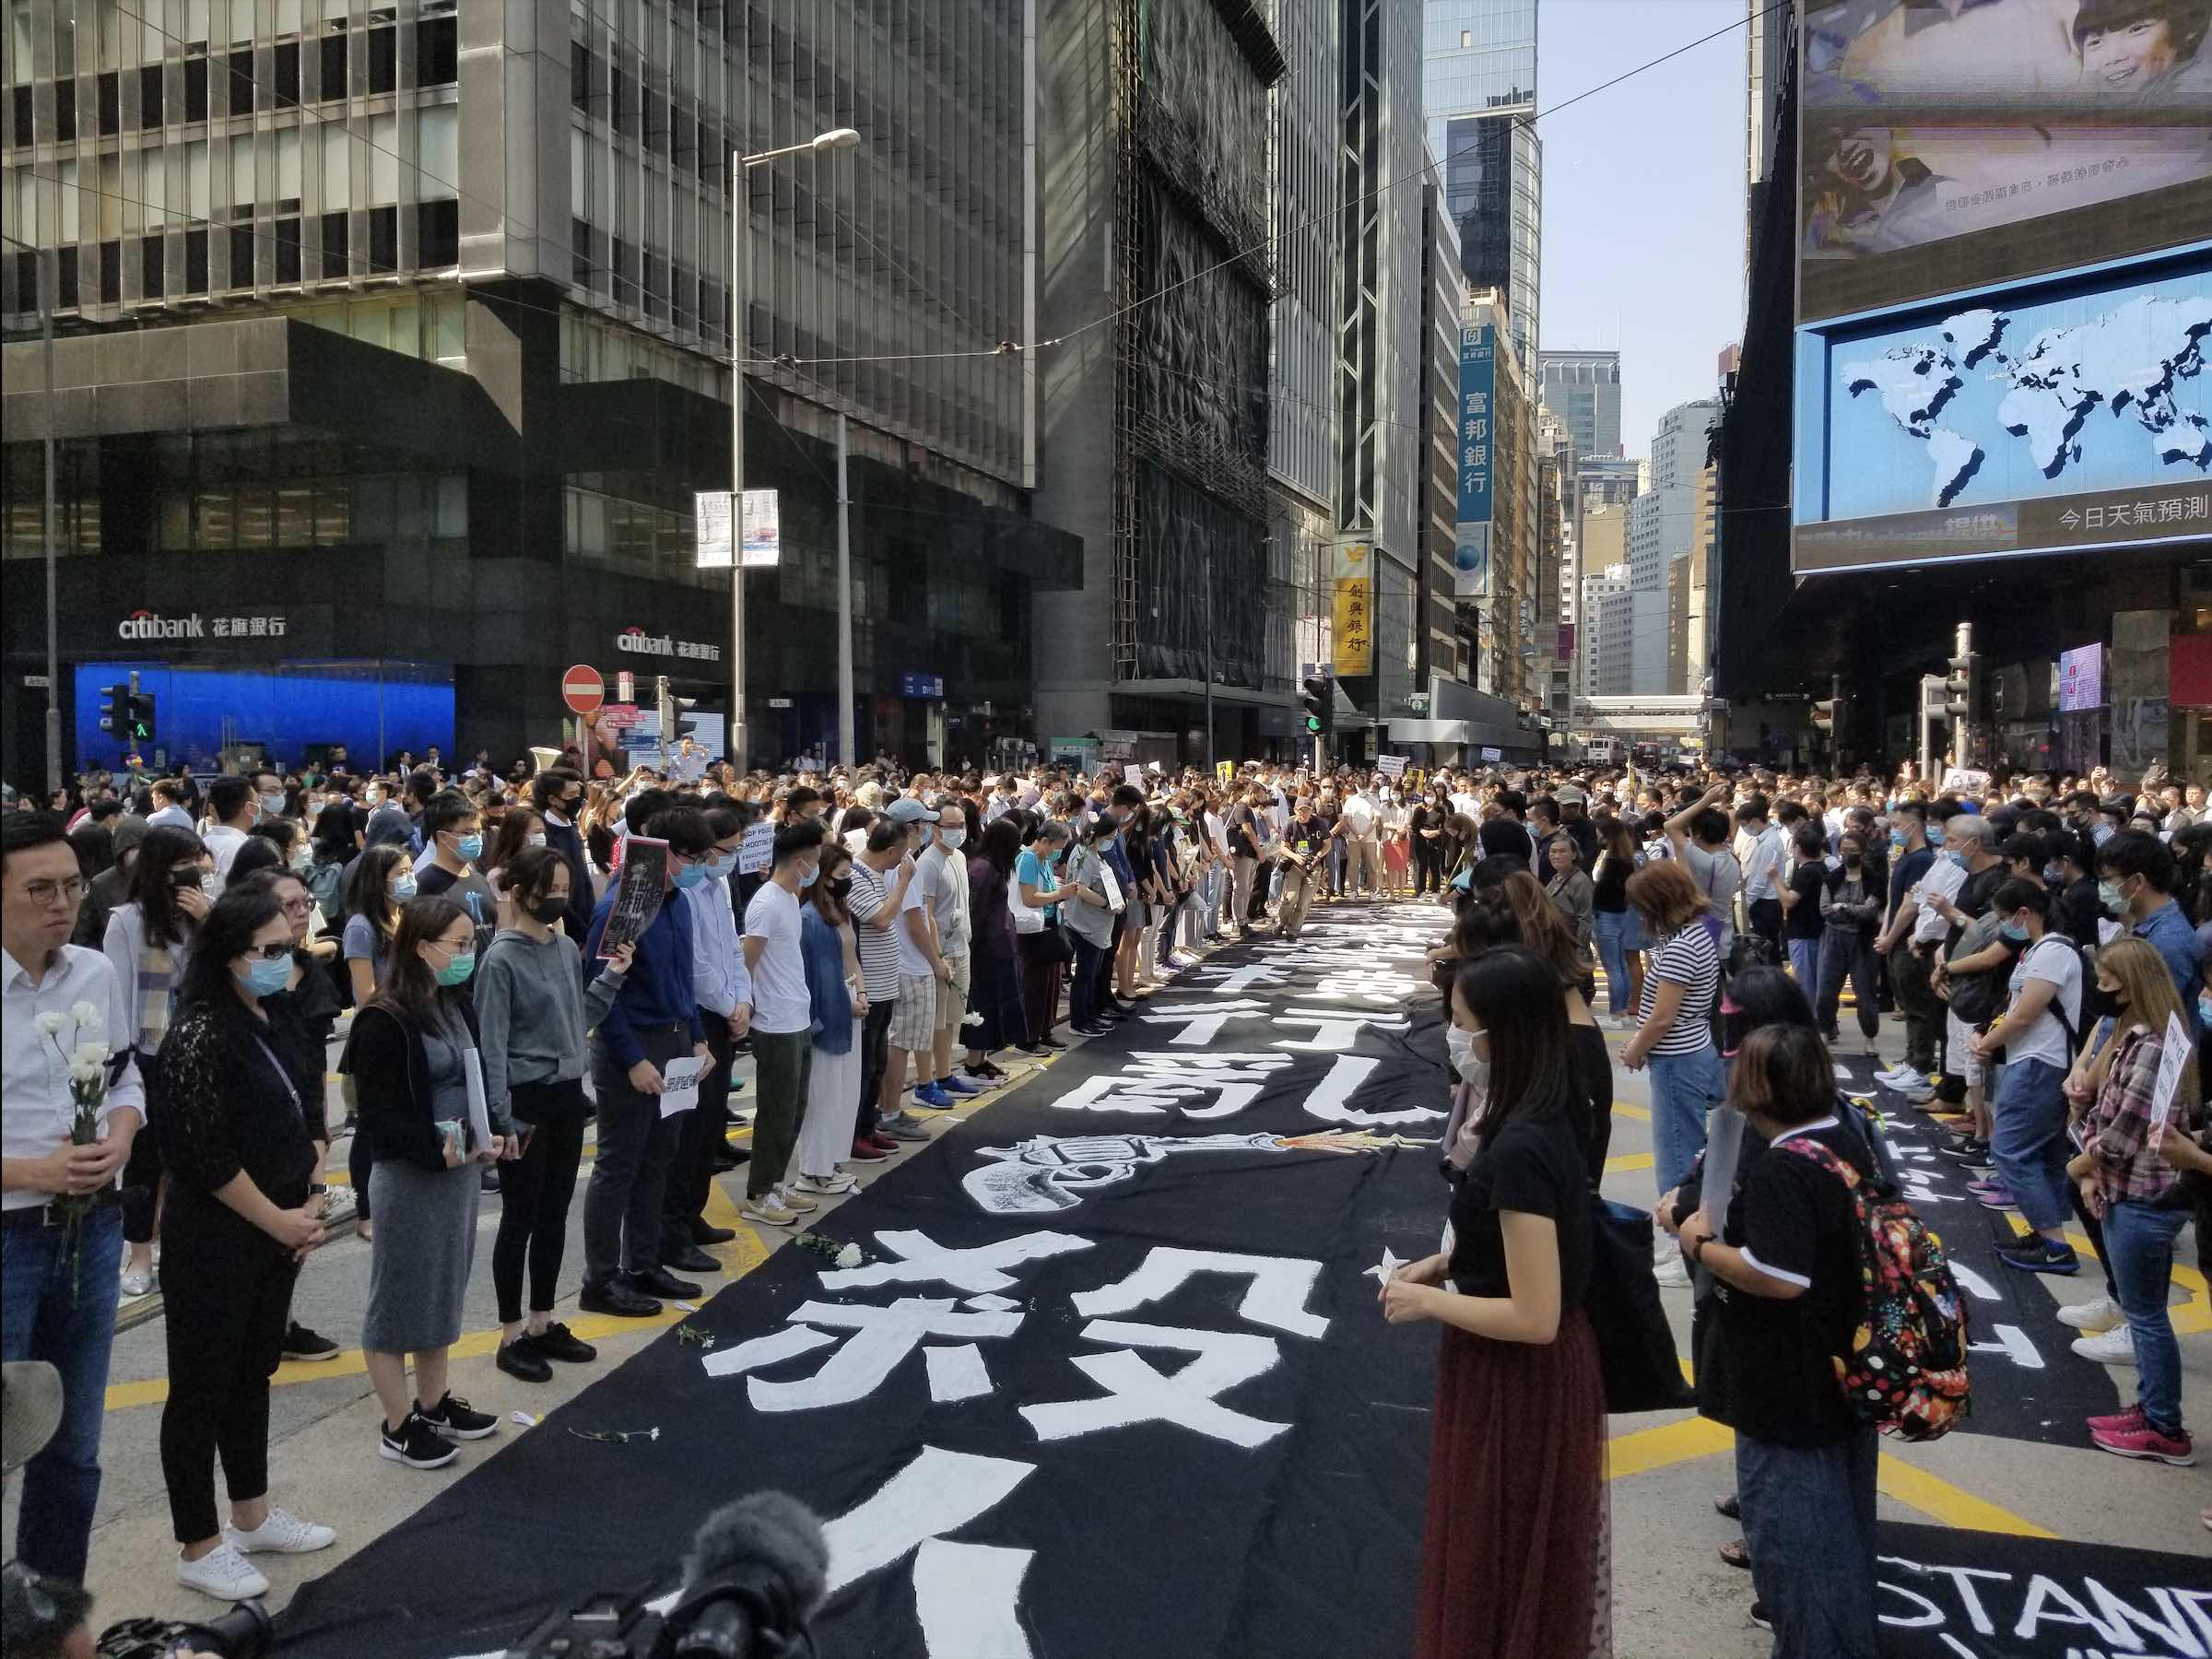 Hundreds have a moment of silence for 22-year-old Chow Tsz-lok, the student who died days after falling from a height at a car park in Tseung Kwan O. Photo by Vicky Wong.